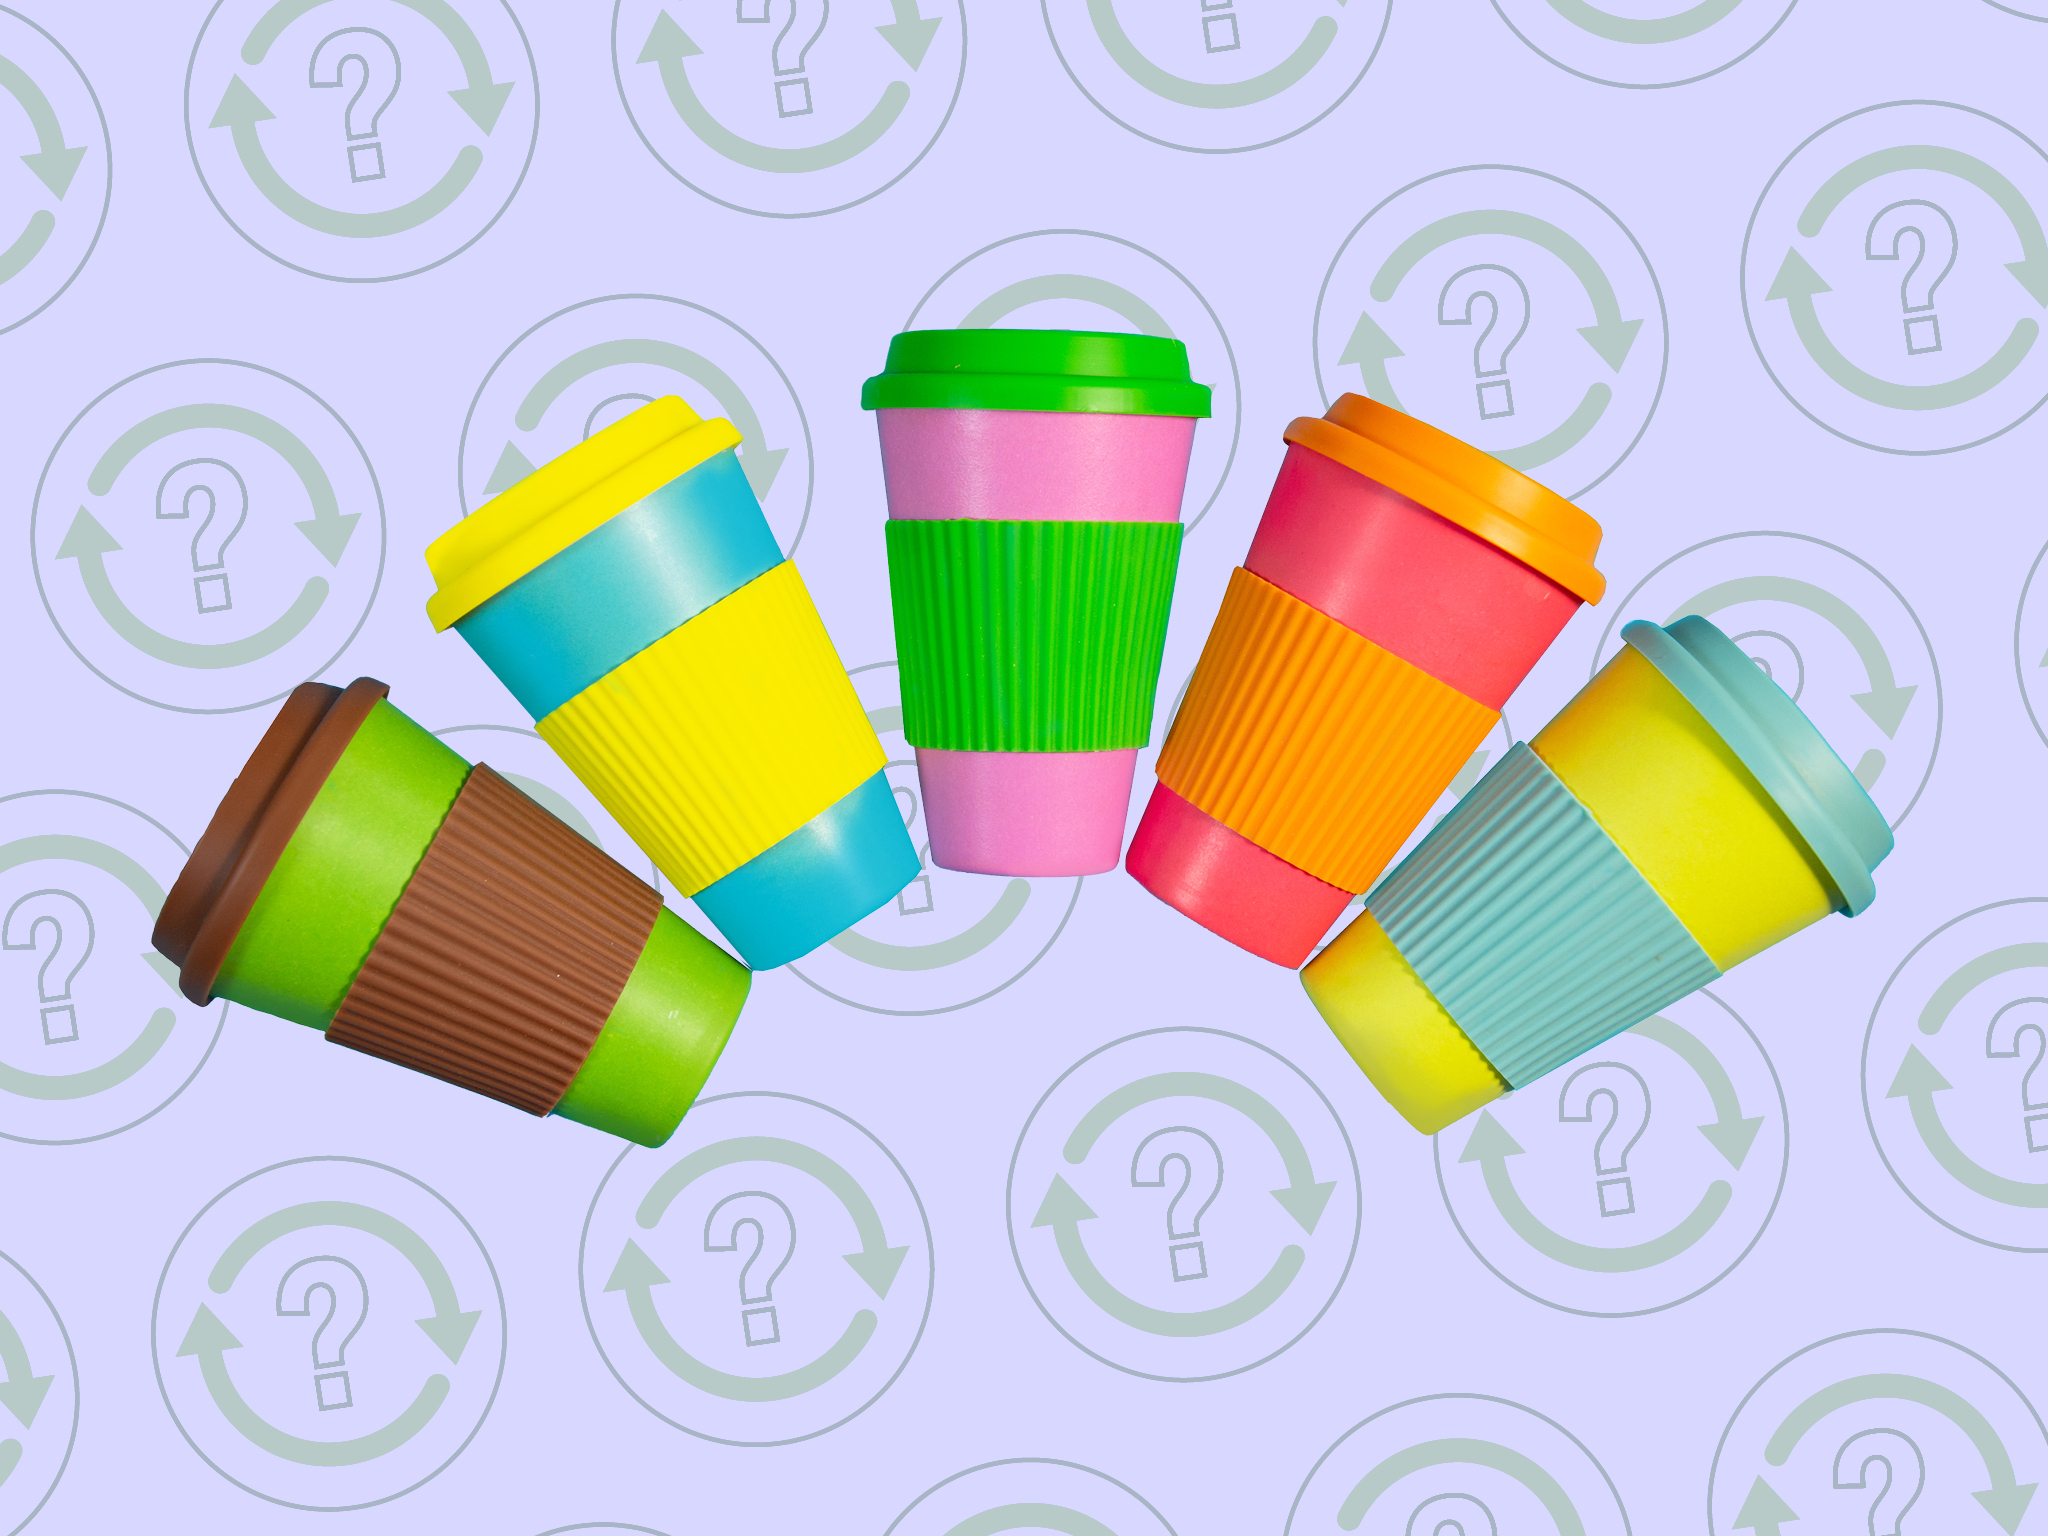 Want to be More Eco-Friendly? Stop Using Disposable Cups! - NO HARM DO